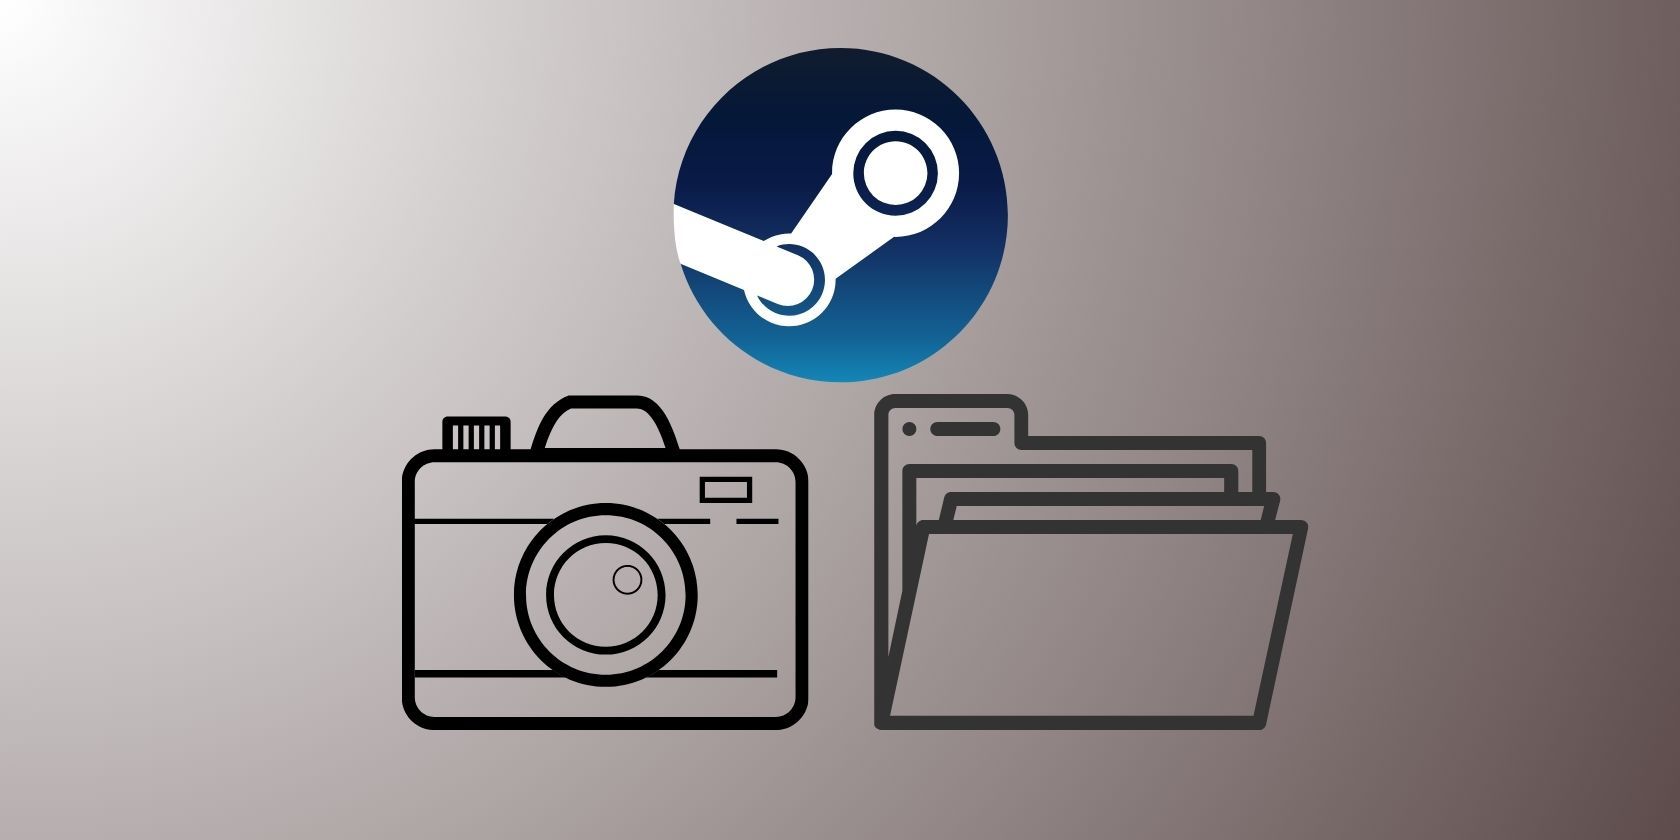 The Steam logo with cartoon vectors of a camera and file on a gray background